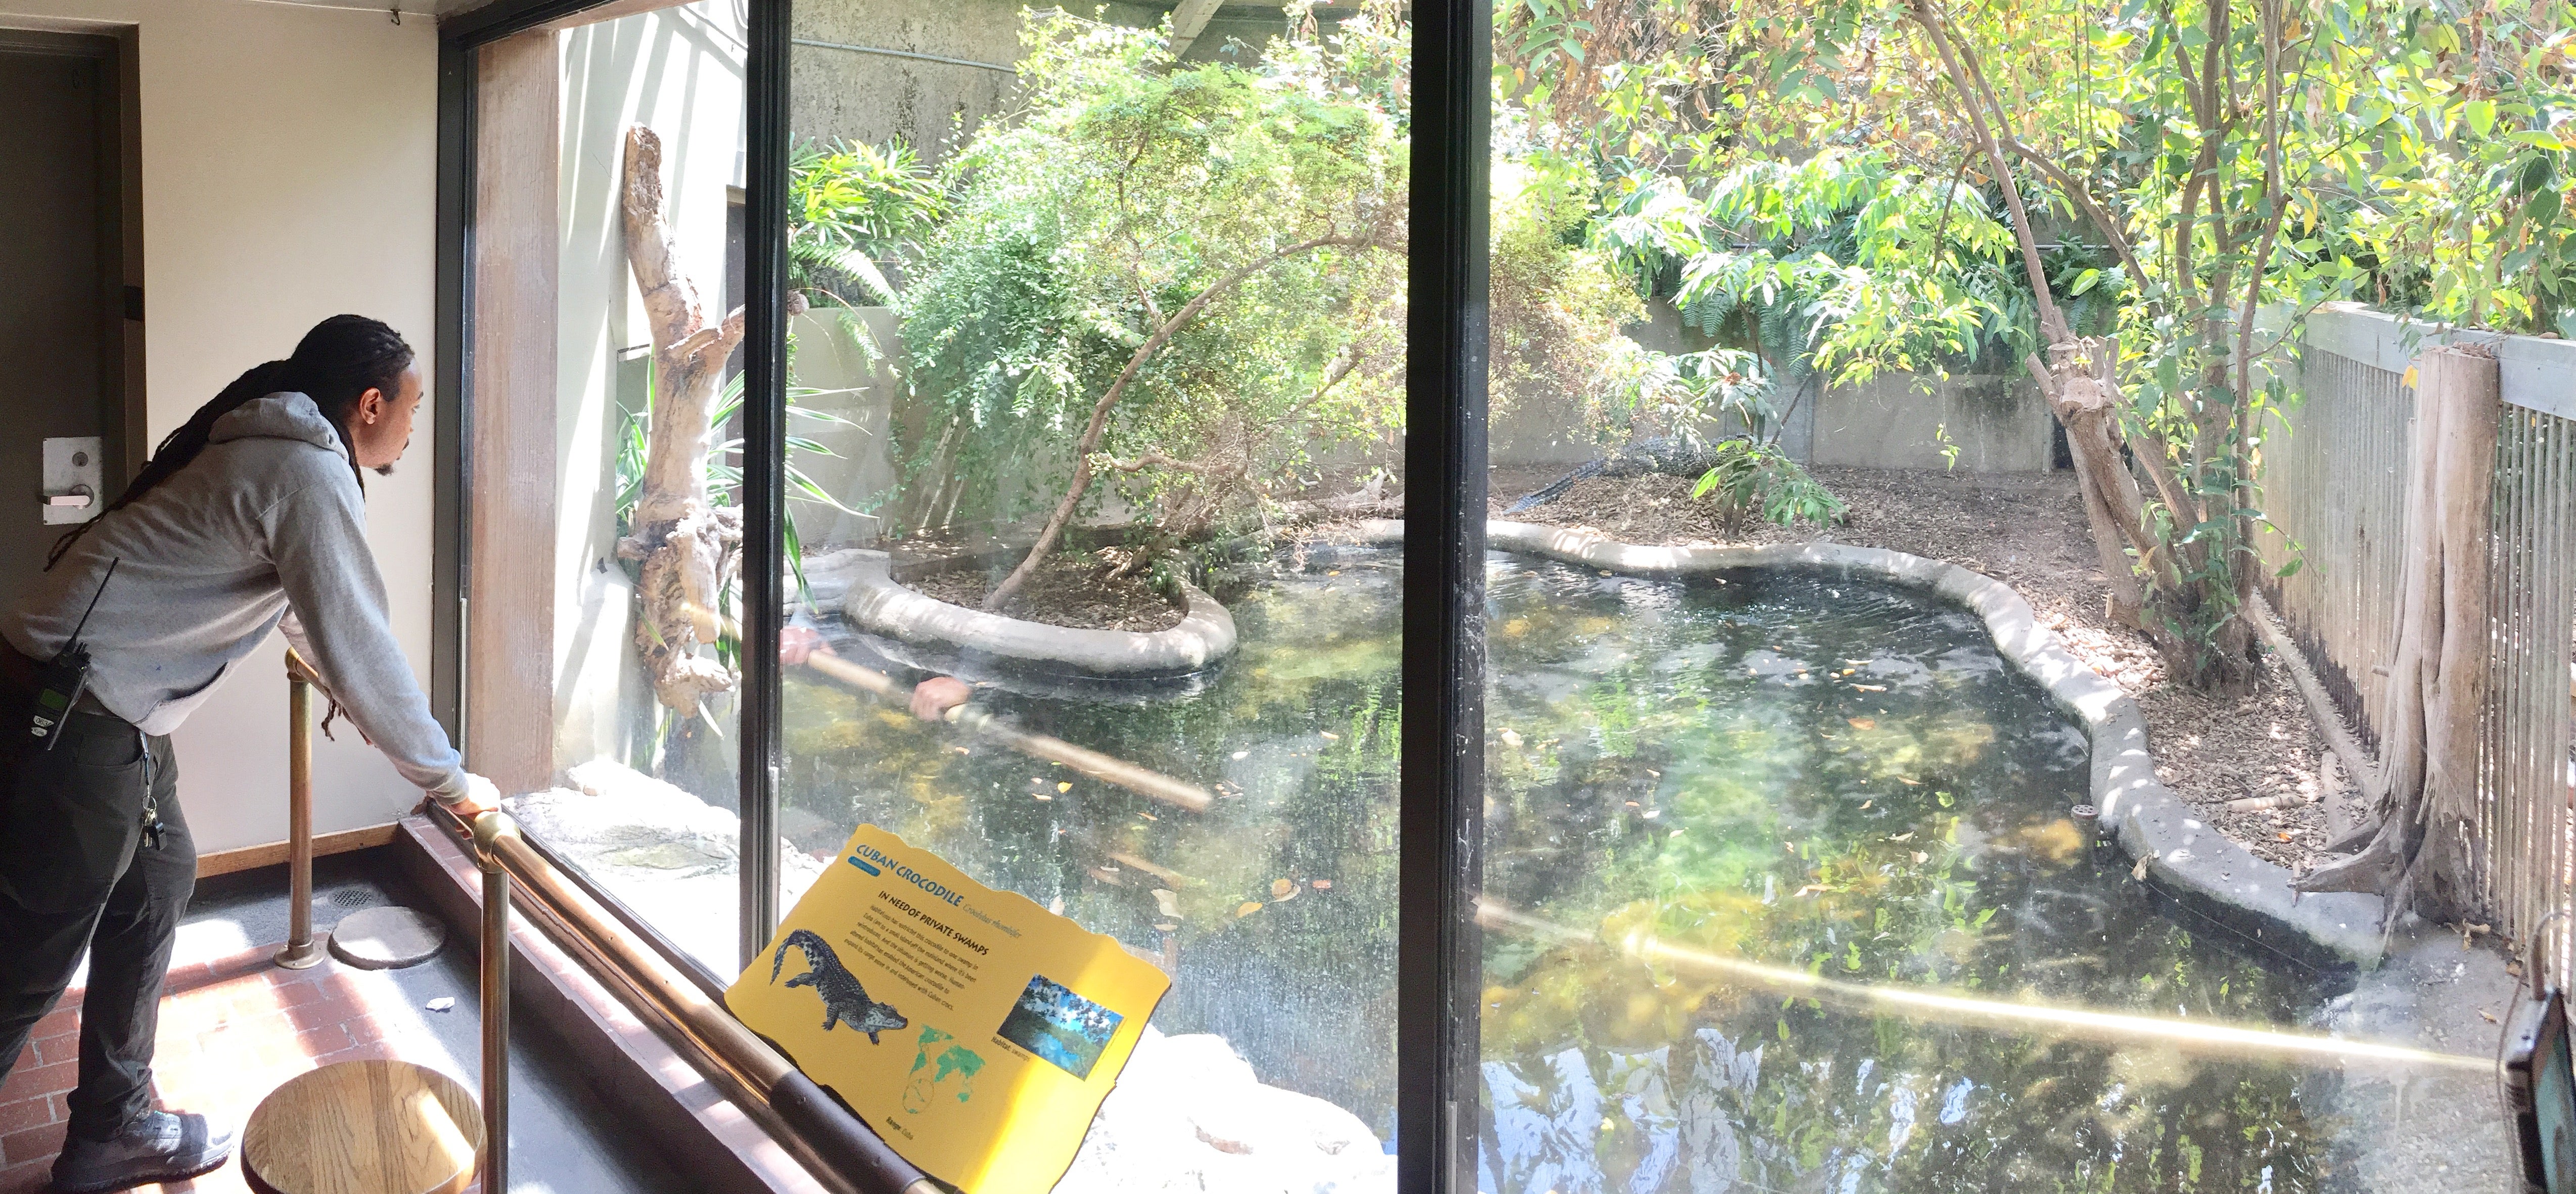 Kyle looks out at the Cuban Crocodile Exhibit